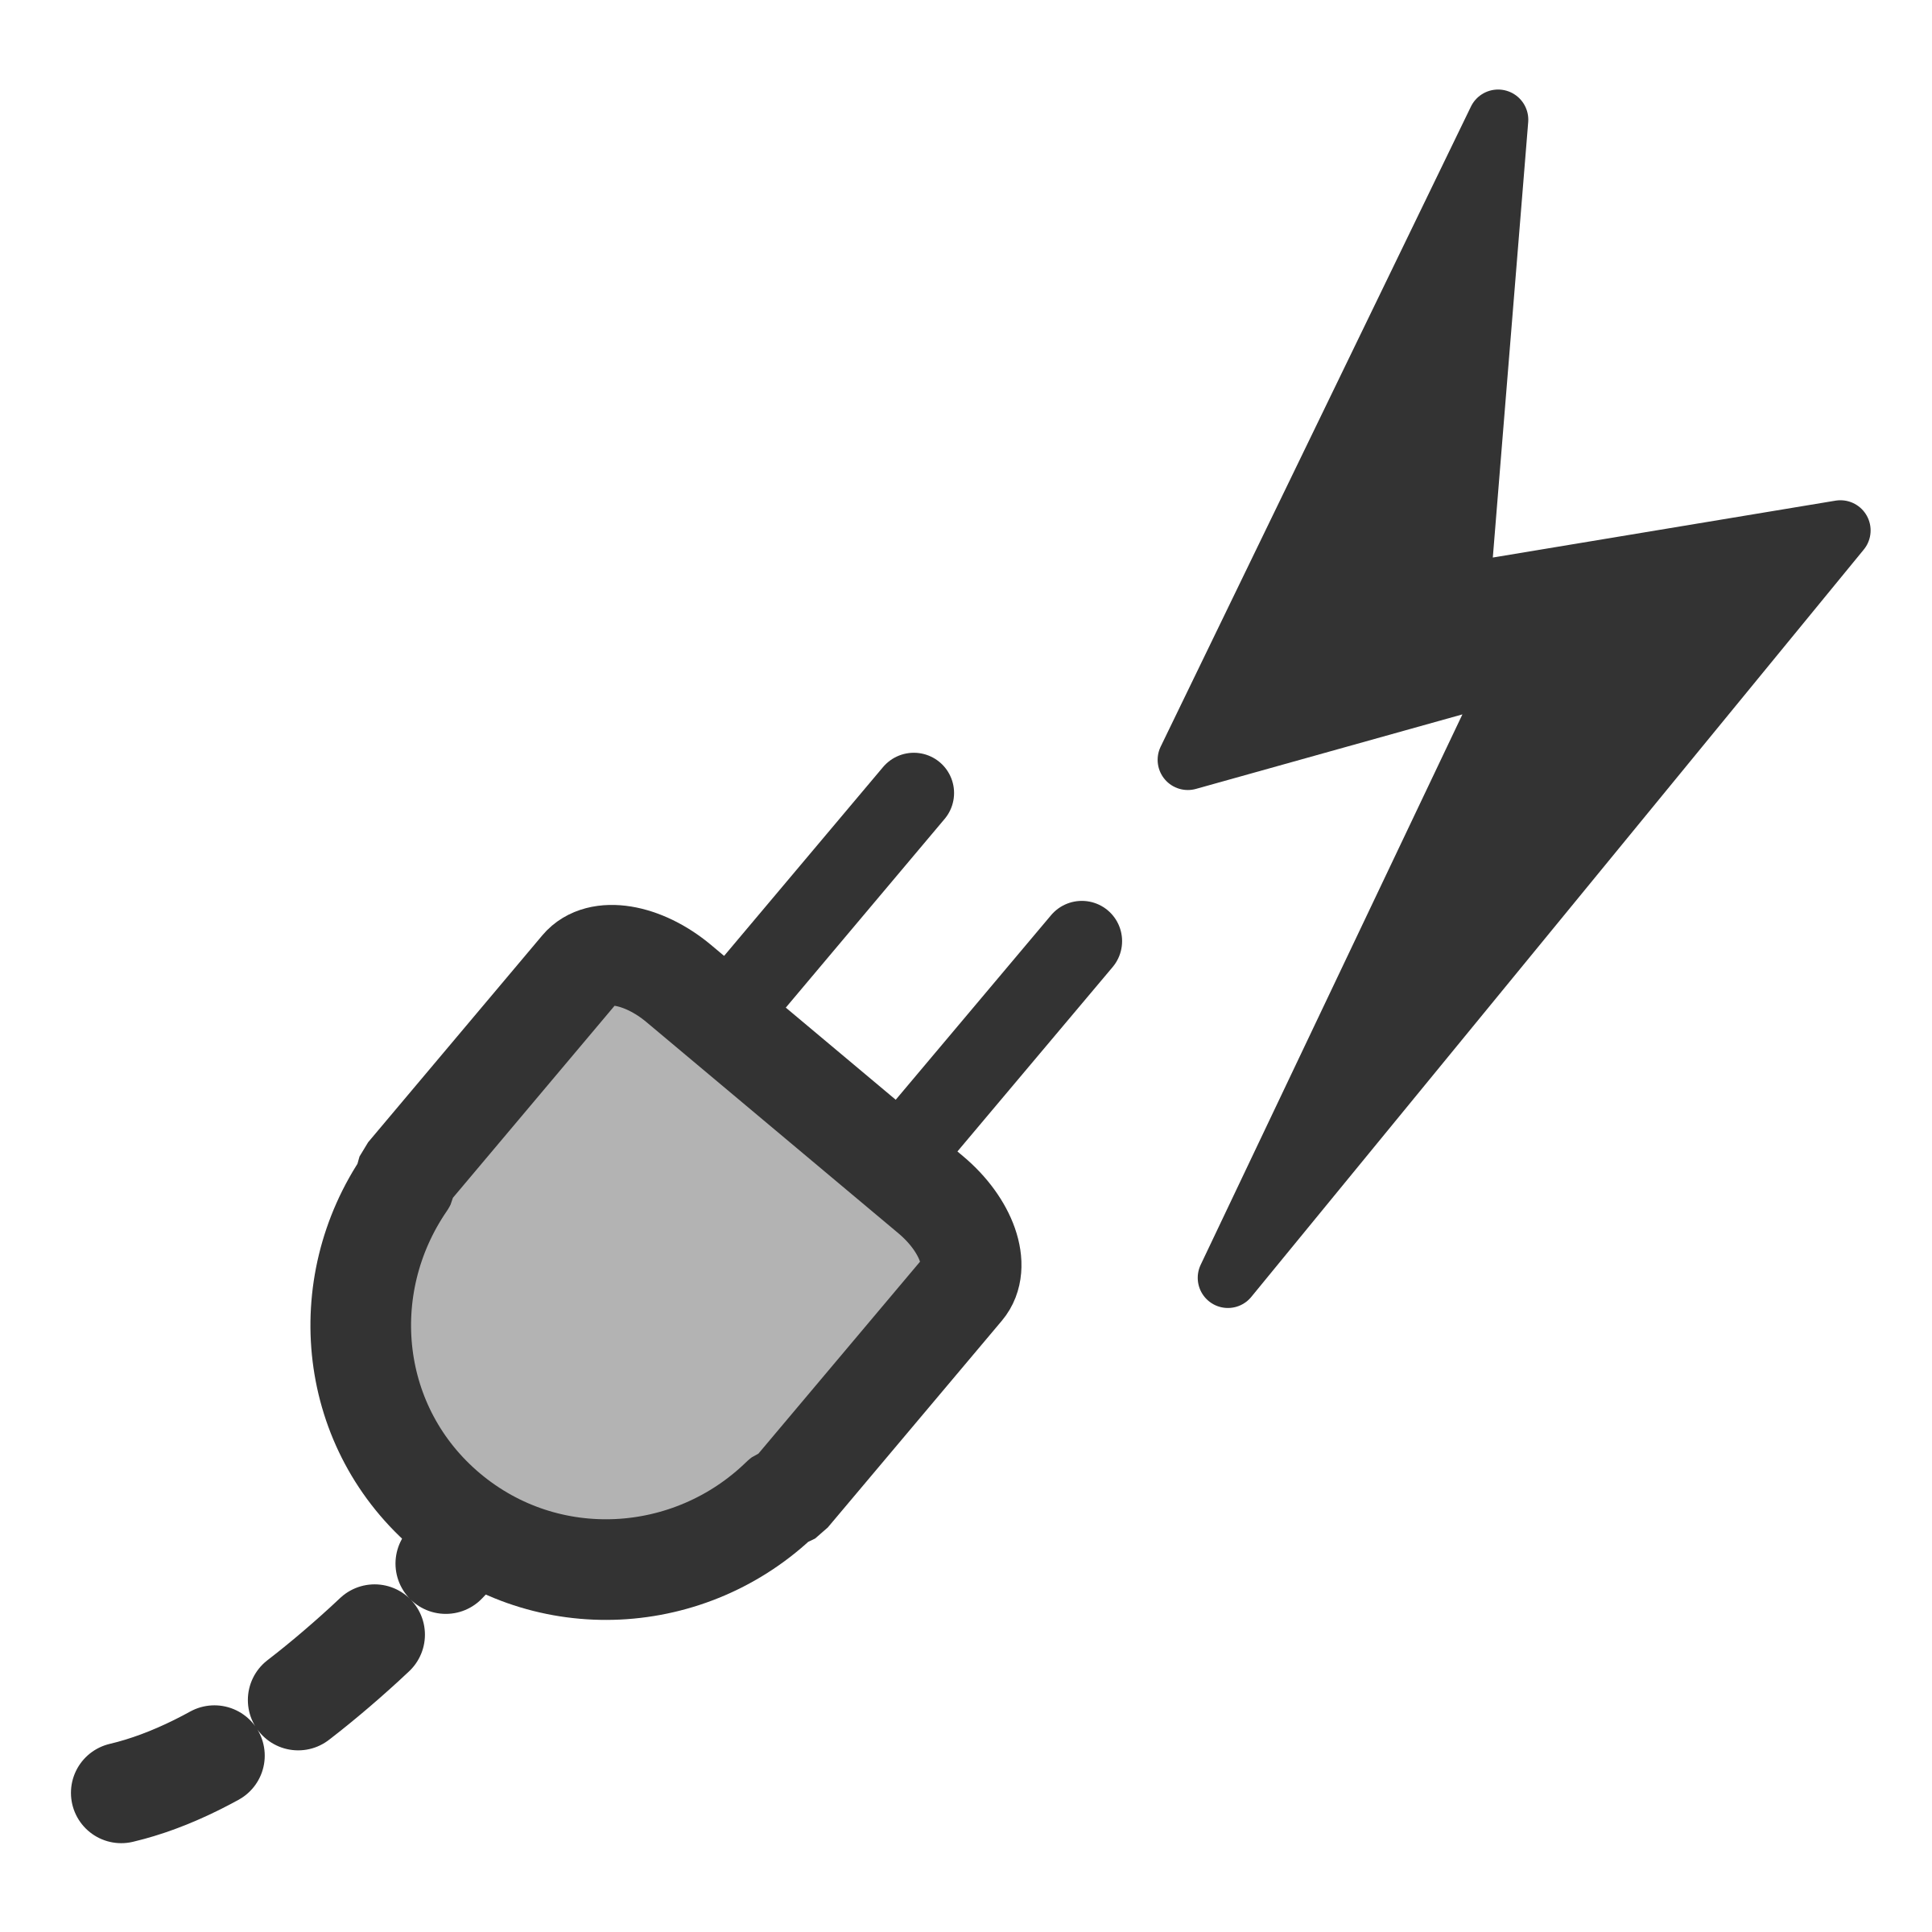 power up clipart - photo #6